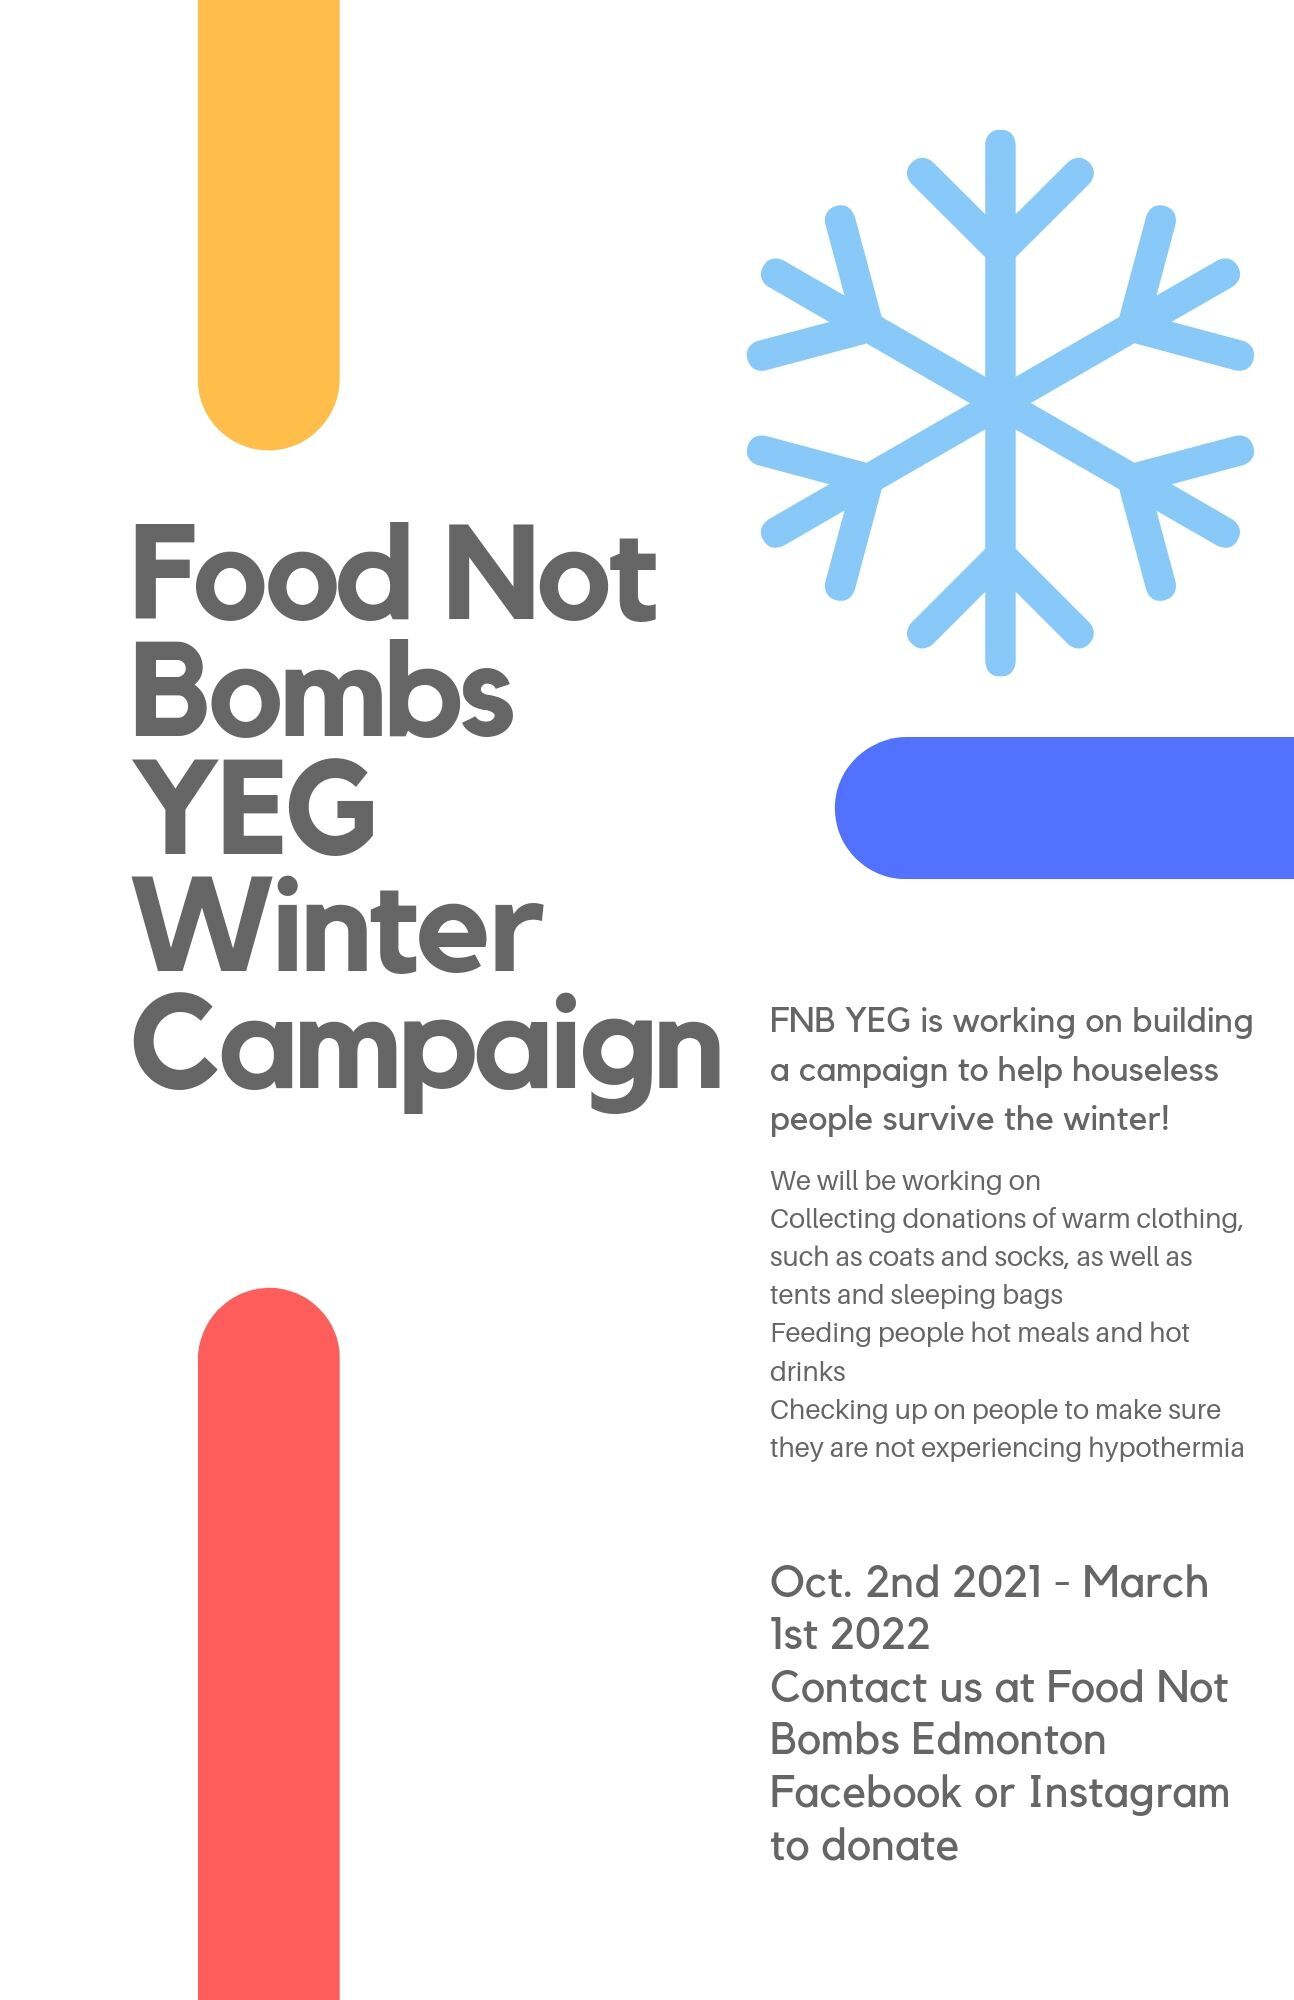 Food Not Bombs YEG Winter Campaign
								FNB YEG is working on building a campaign to help houseless people survive the winter!
								We will be working on collecting donations of warm clothing, such as coats and socks, as well as tents and sleeping bags. 
								Feeding people hot meals and hot drinks.
								Checking up on people to make sure they are not experiencing hypothermia.

								Oct. 2 2021-March 1, 2022

								Contact us at Food Not Bombs Edmonton on Facebook or Instagram to donate.